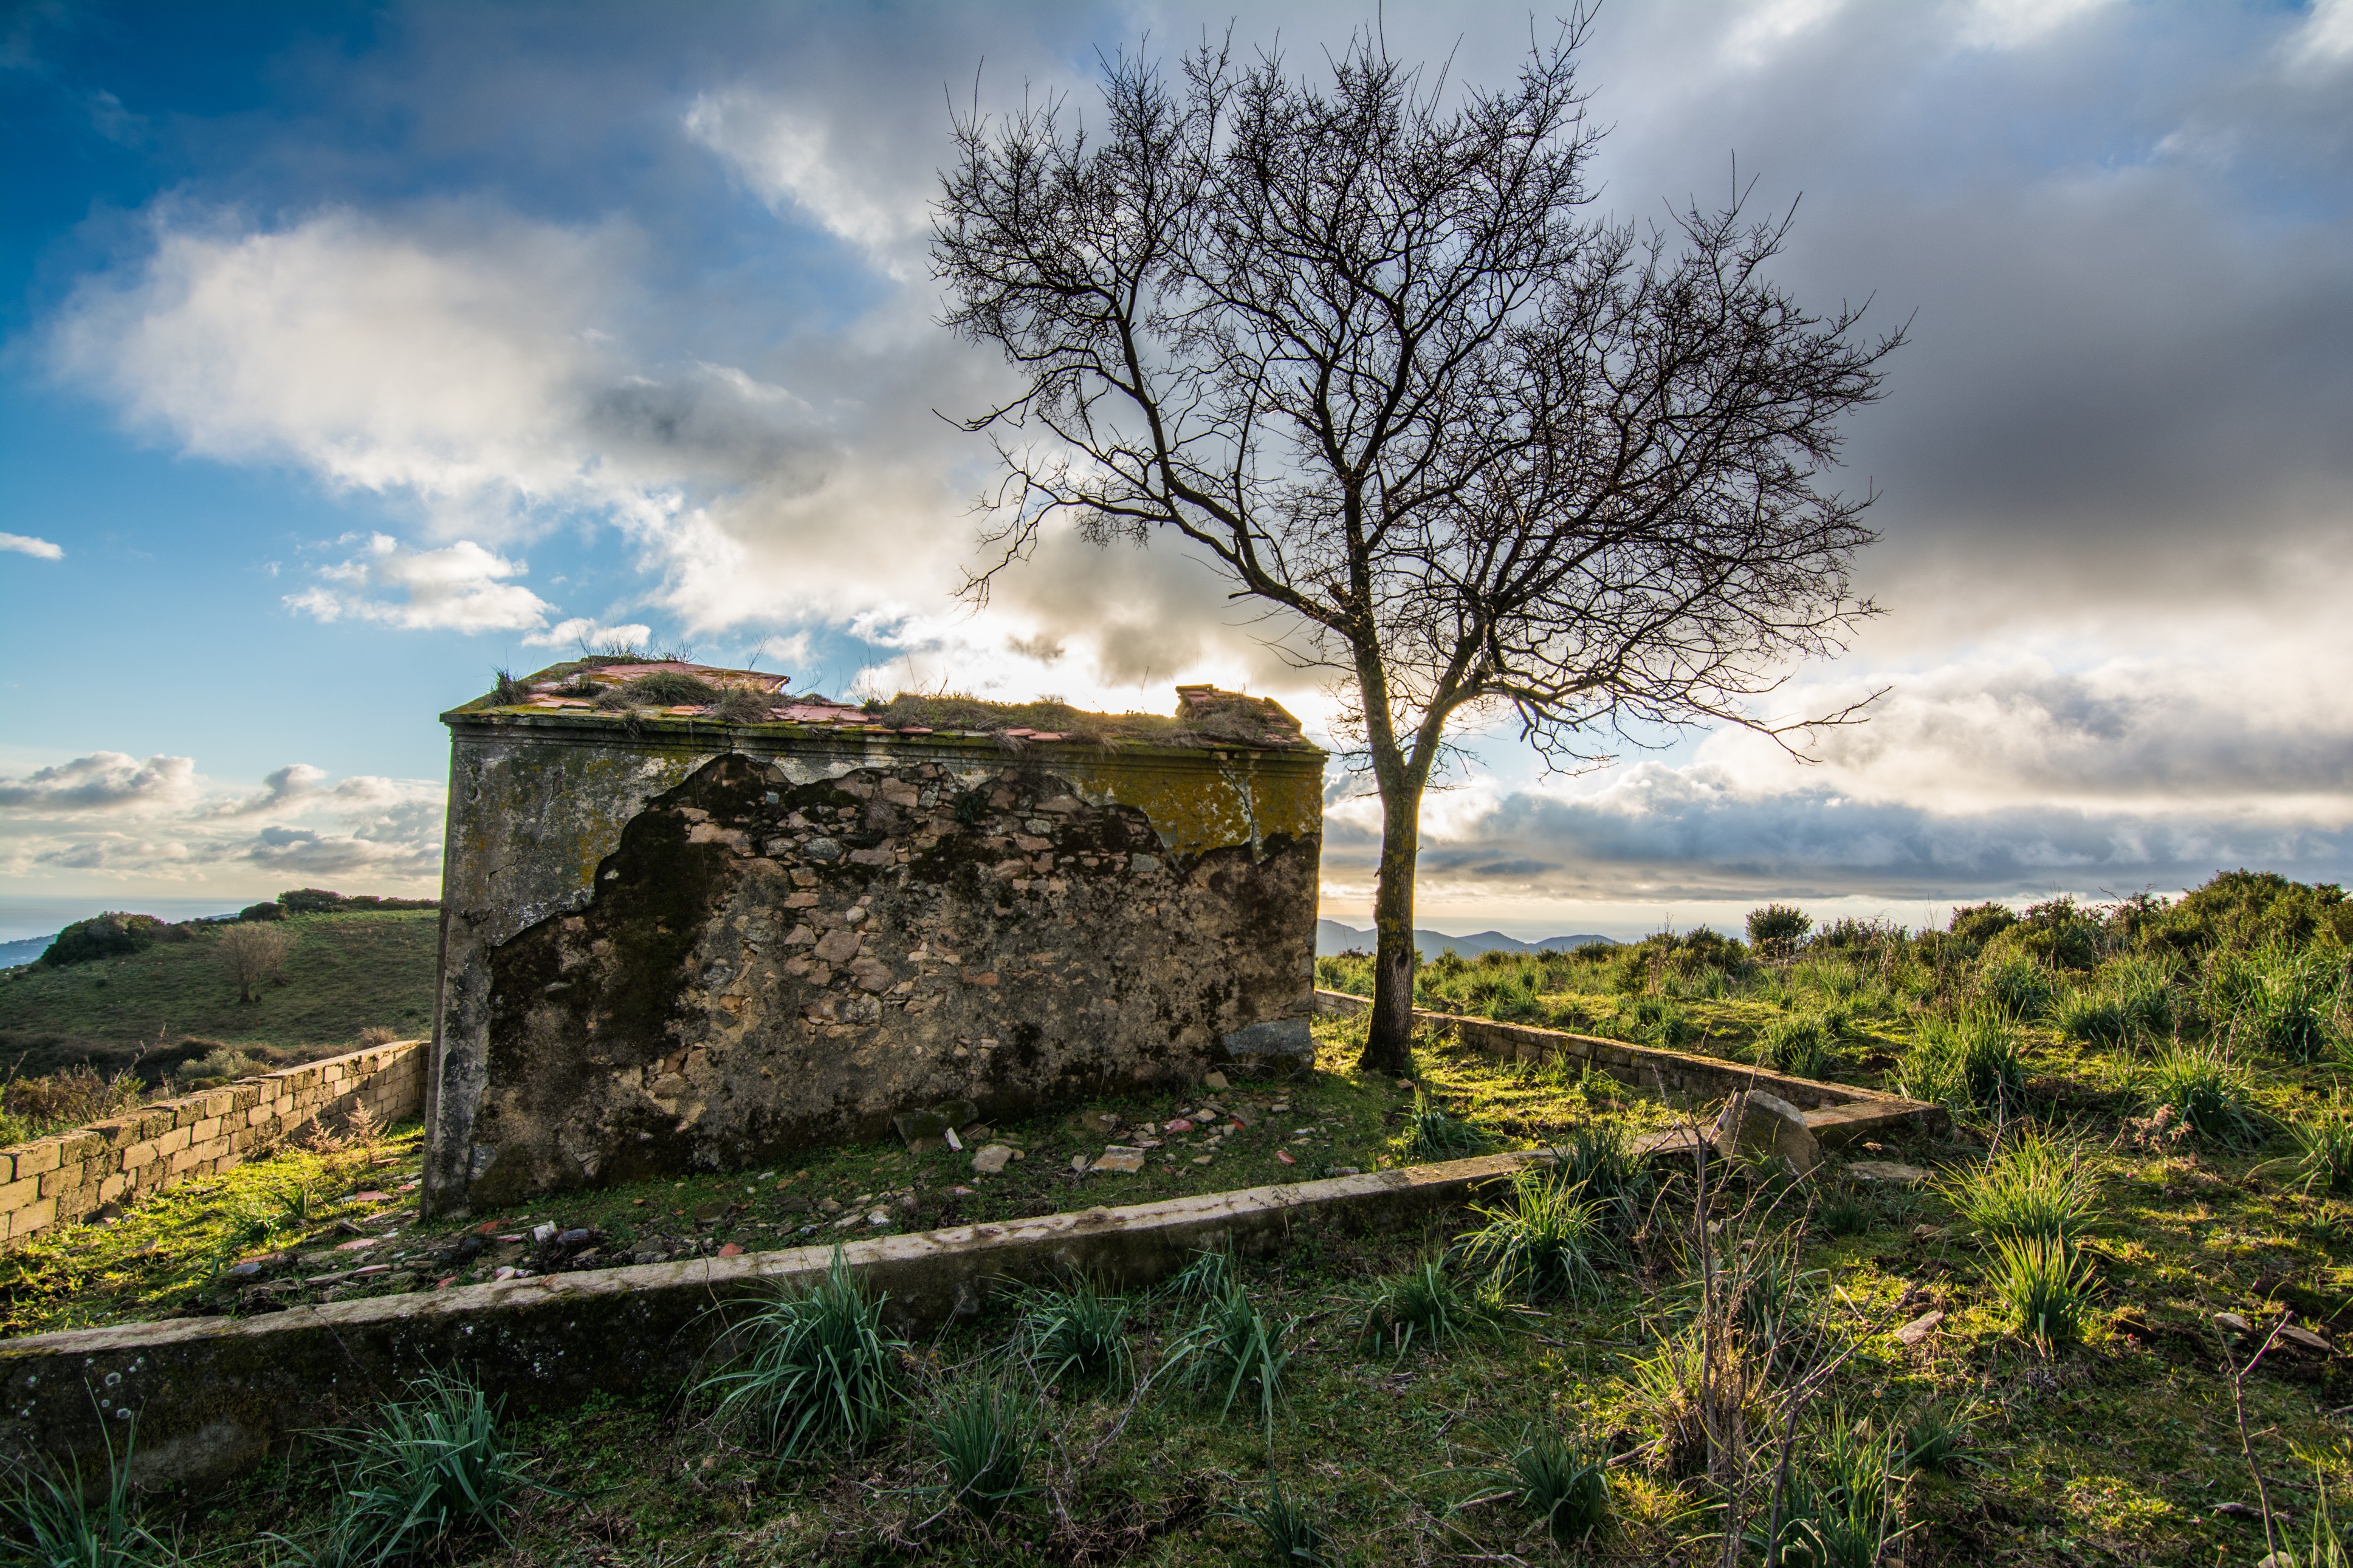 General 3872x2581 landscape cabin abandoned trees ruins outdoors sky